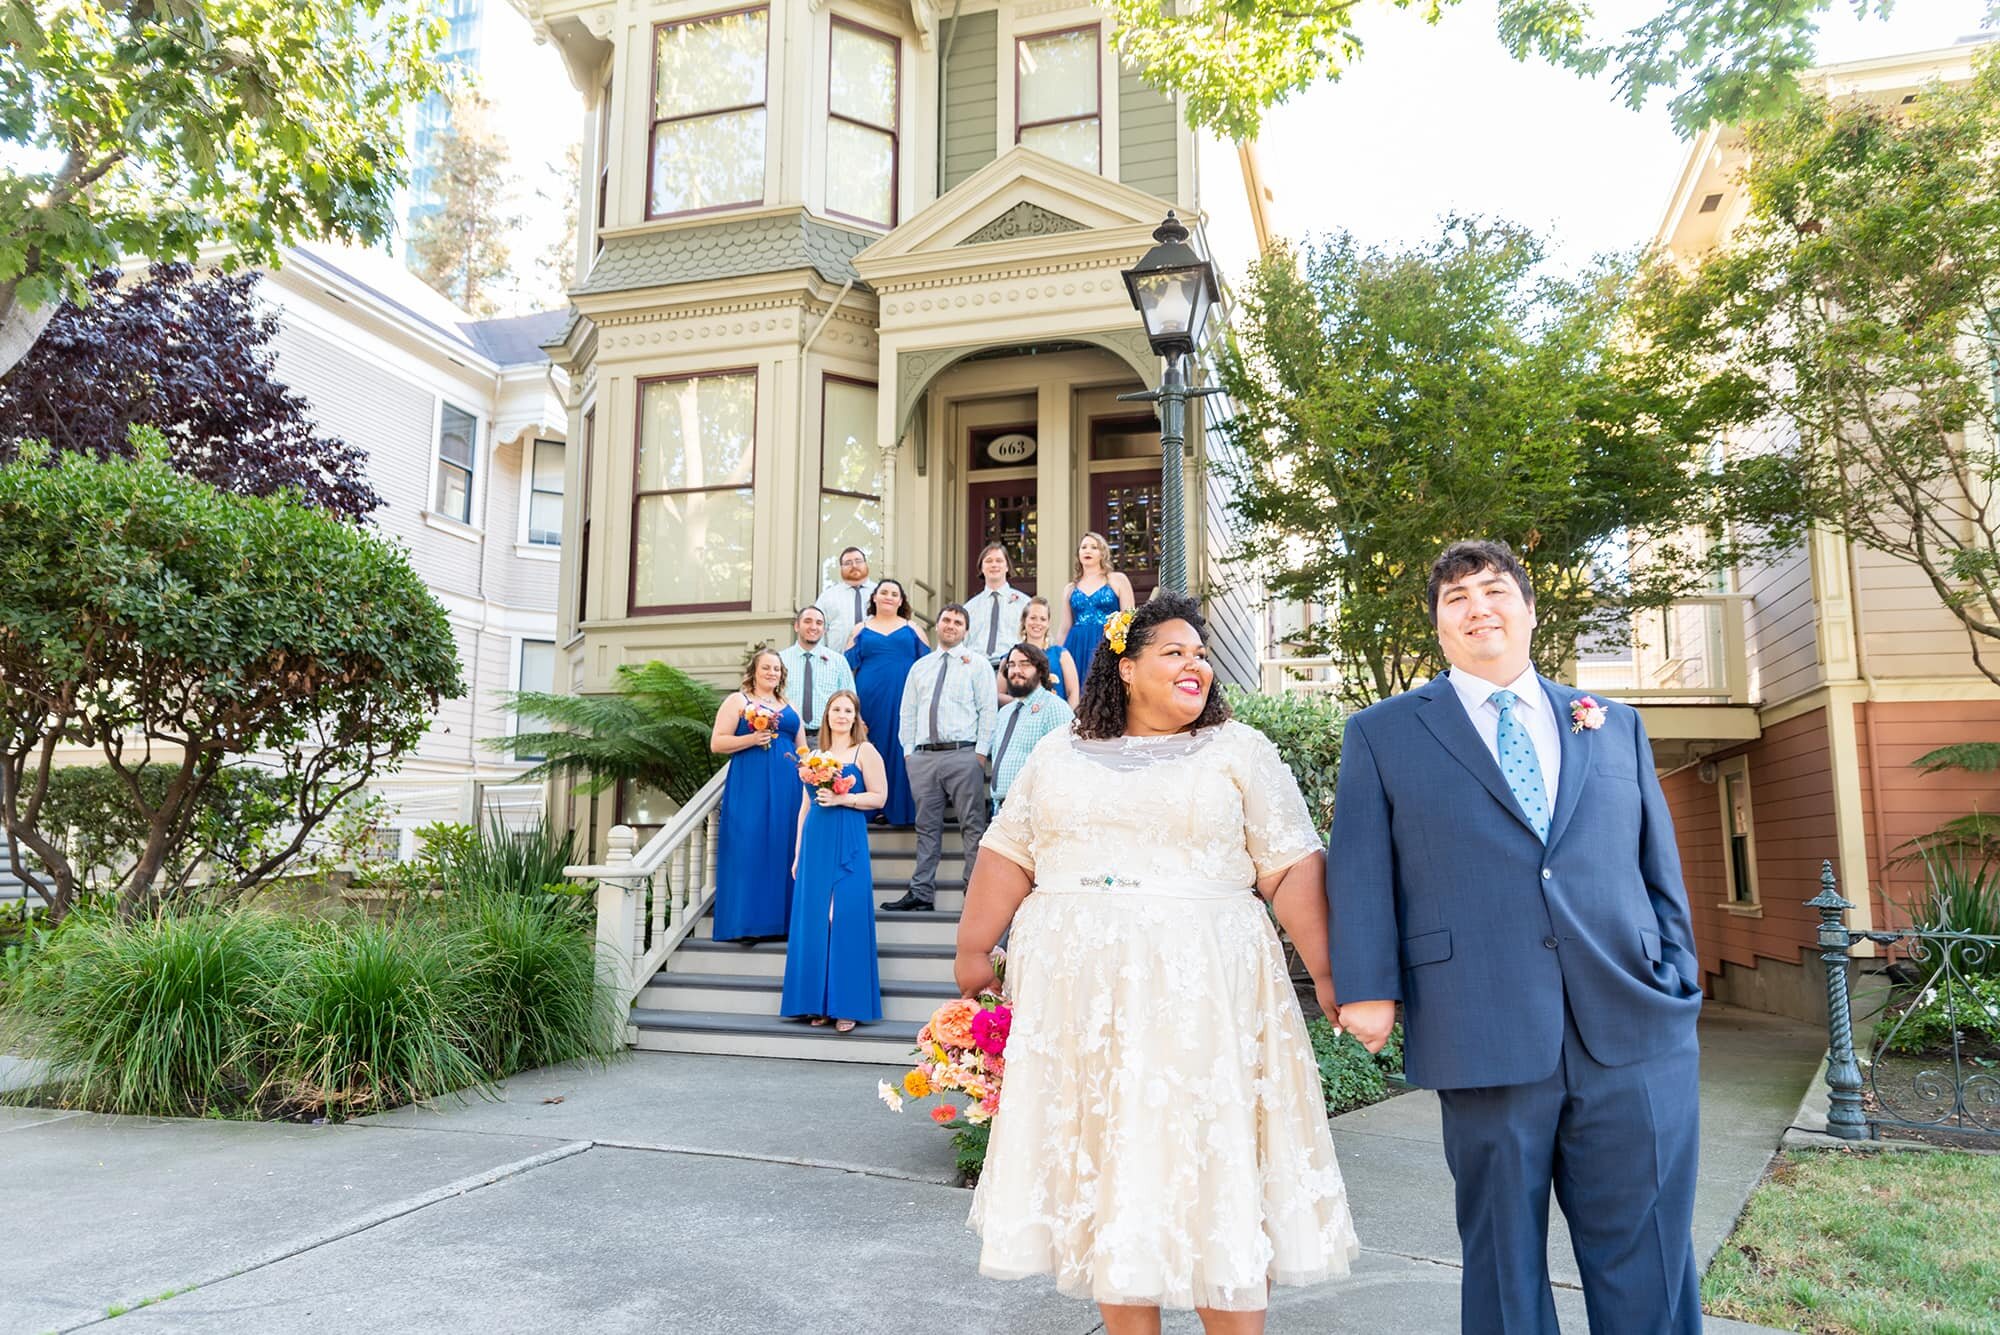 Bride and Groom with wedding party on steps of Victorian House in Oakland